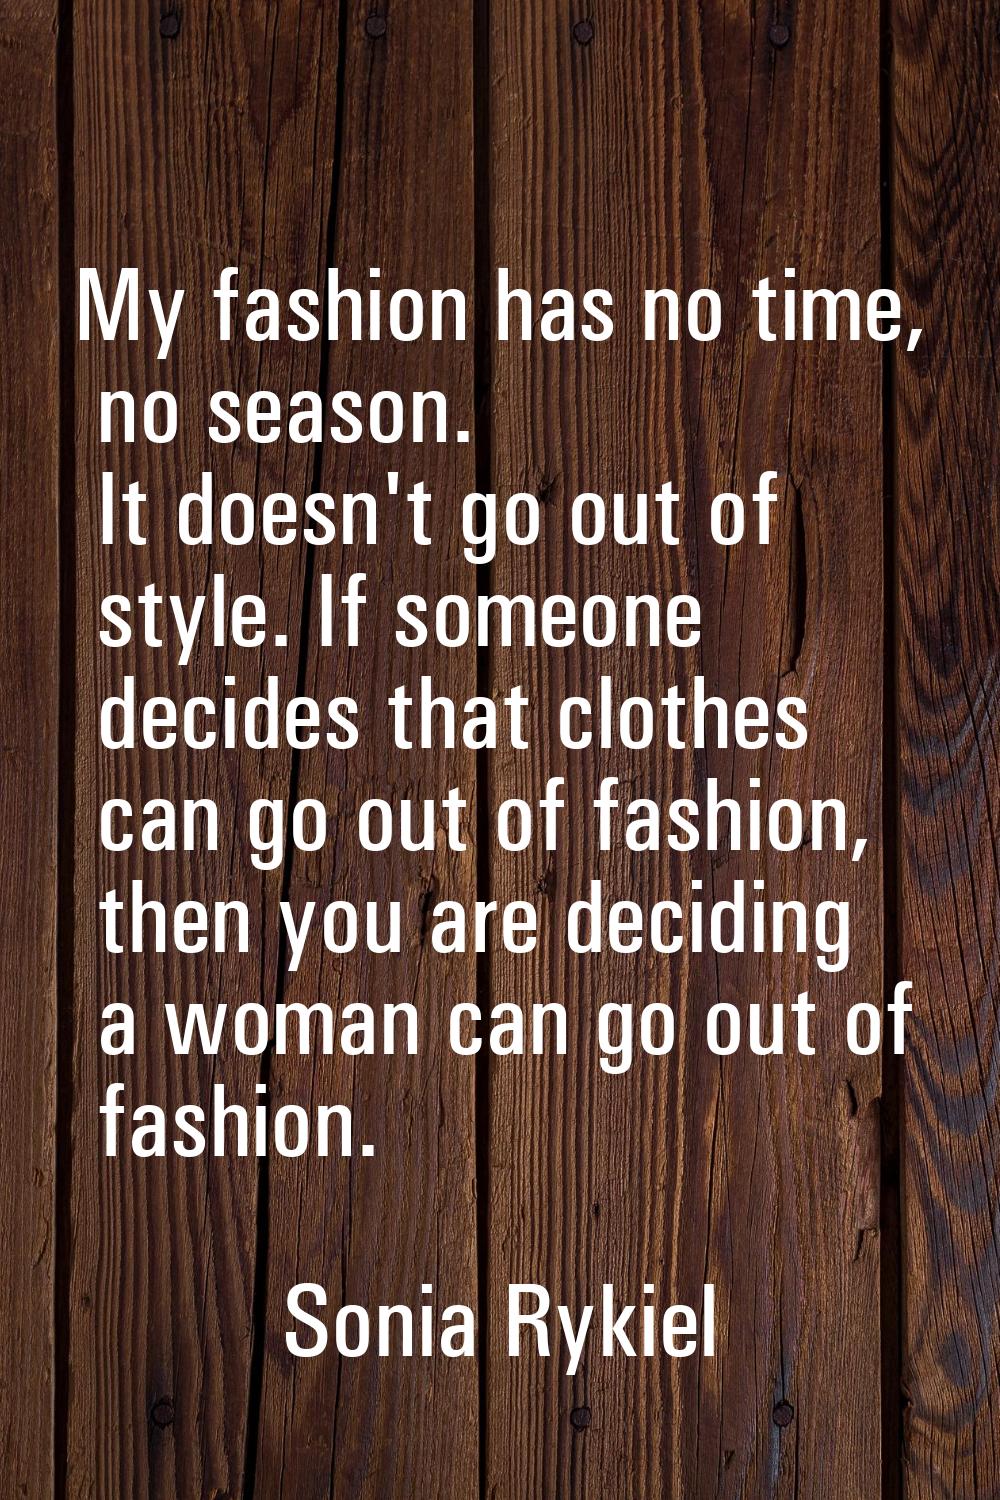 My fashion has no time, no season. It doesn't go out of style. If someone decides that clothes can 